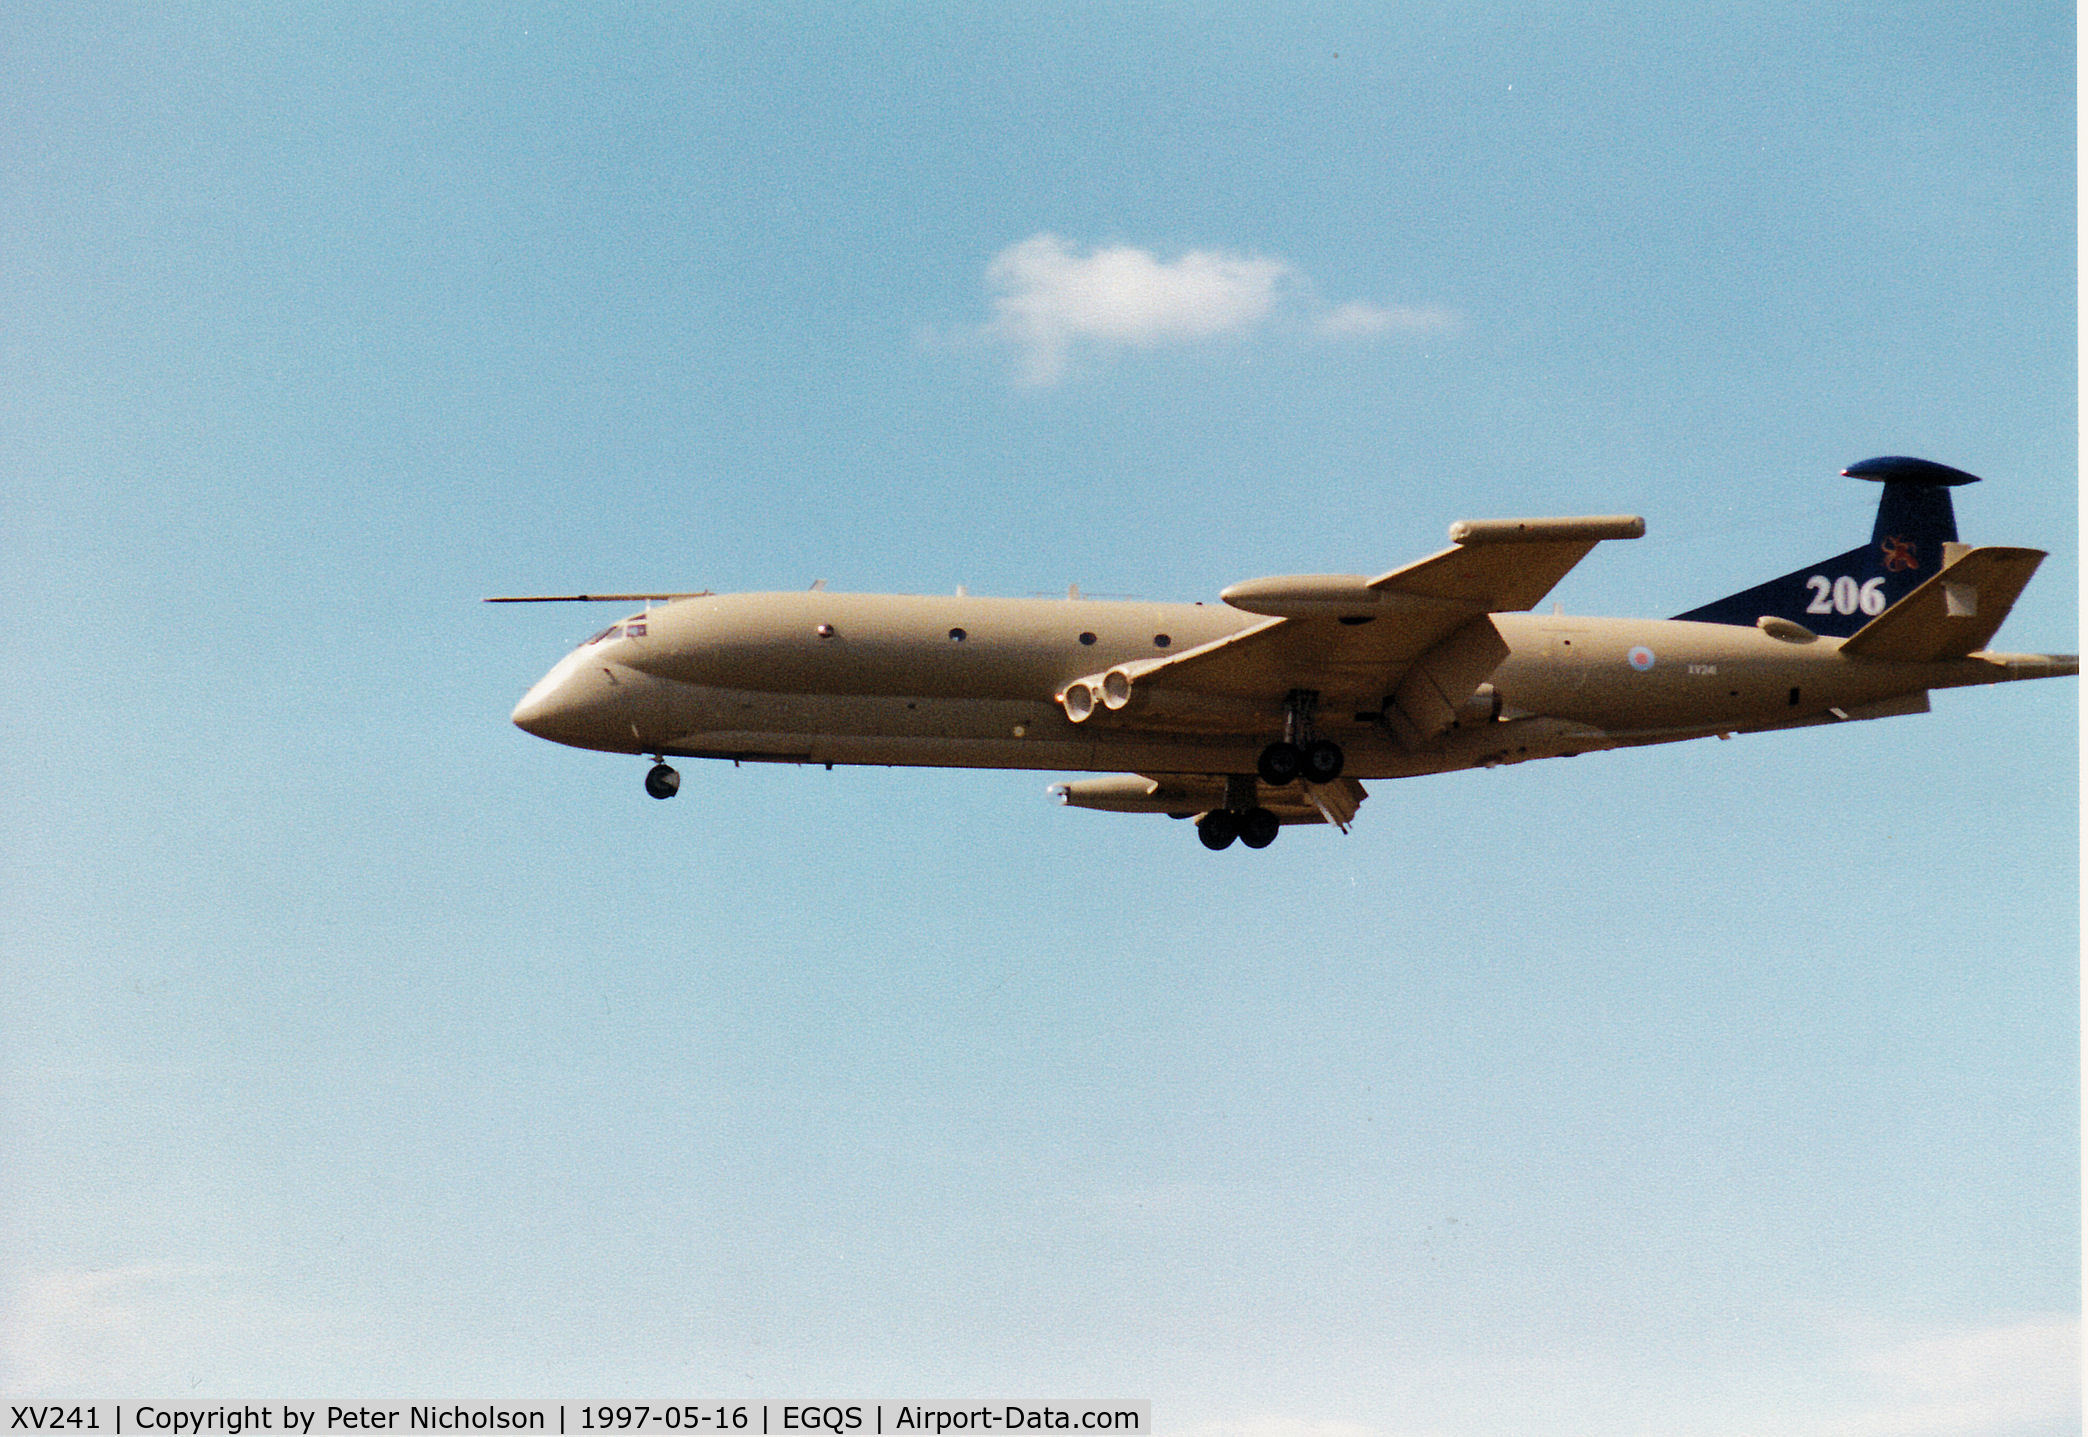 XV241, Hawker Siddeley Nimrod MR.2 C/N 8016, Nimrod MR.2 of the Kinloss Maritime Wing on approach to Runway 23 at RAF Lossiemouth in May 1997.